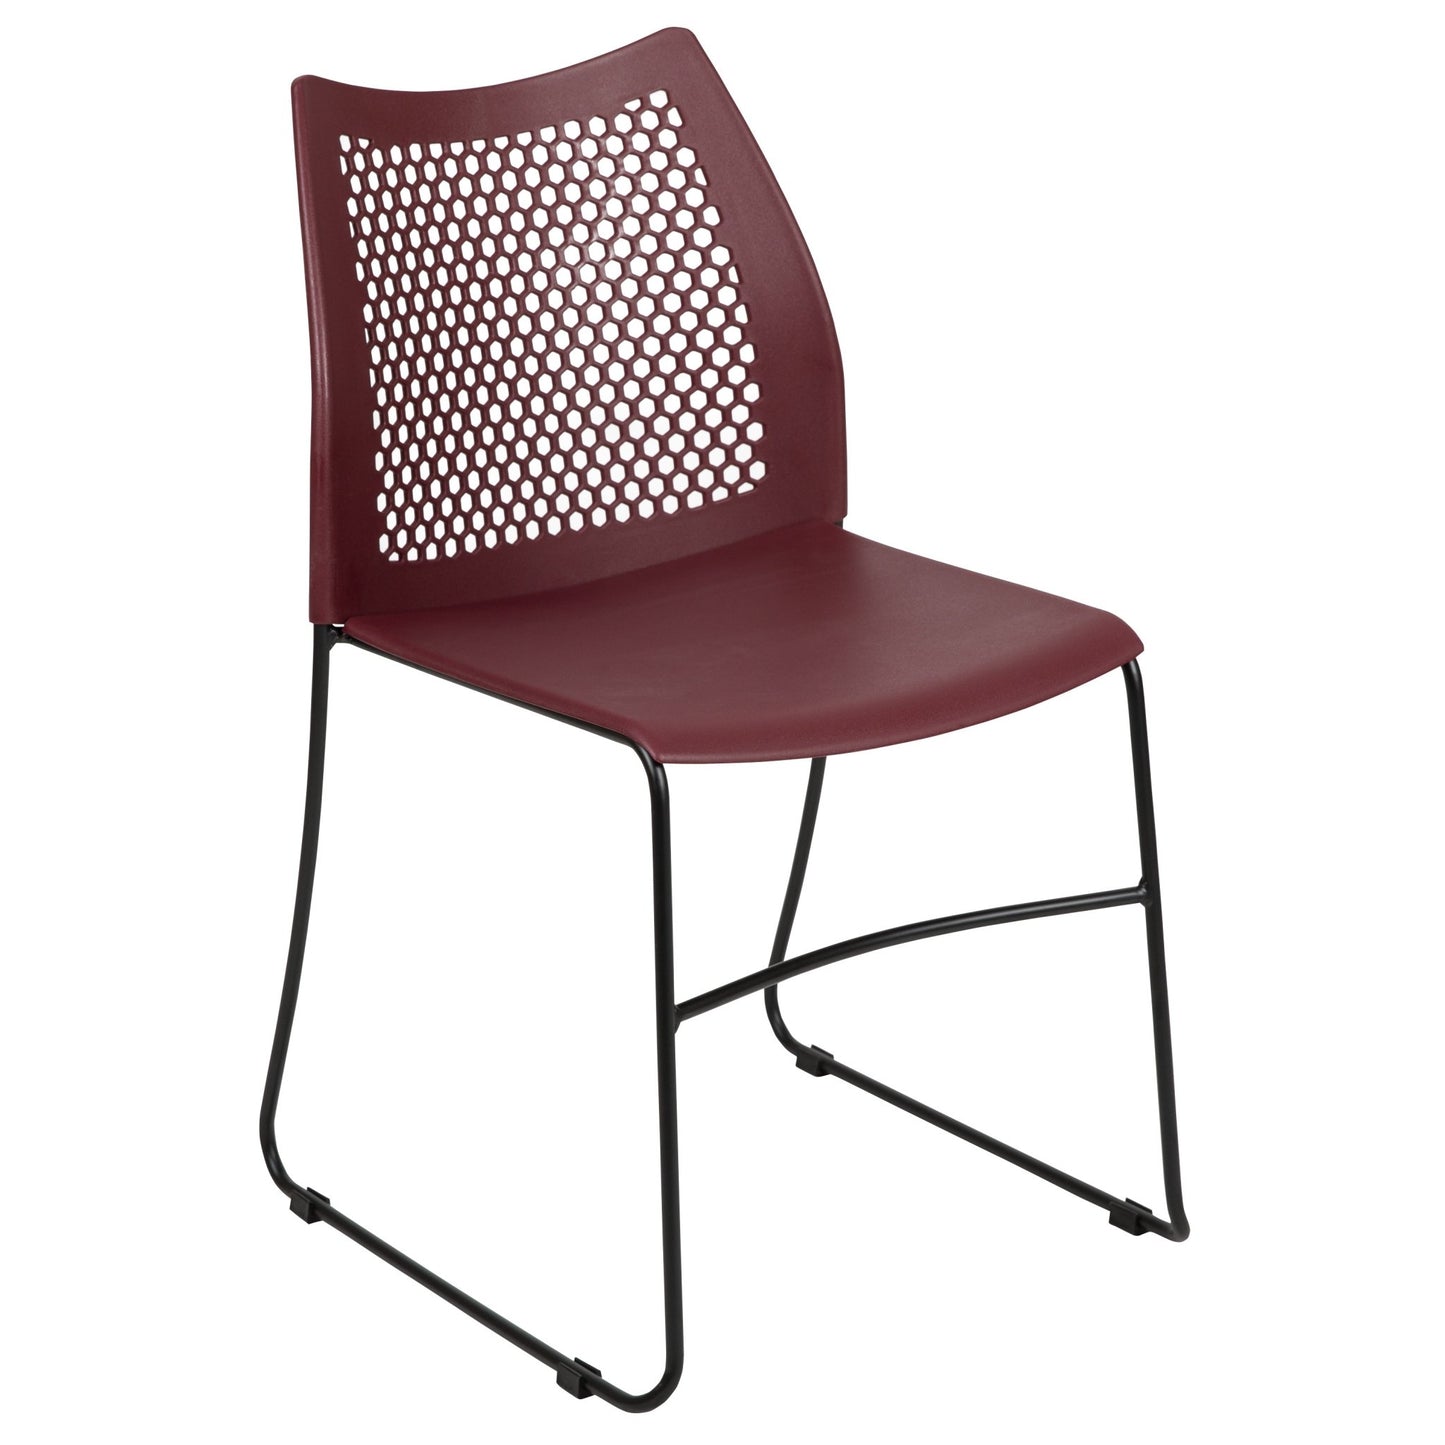 HERCULES Series 661 lb. Capacity Stack Chair with Air-Vent Back and Powder Coated Sled Base - SchoolOutlet